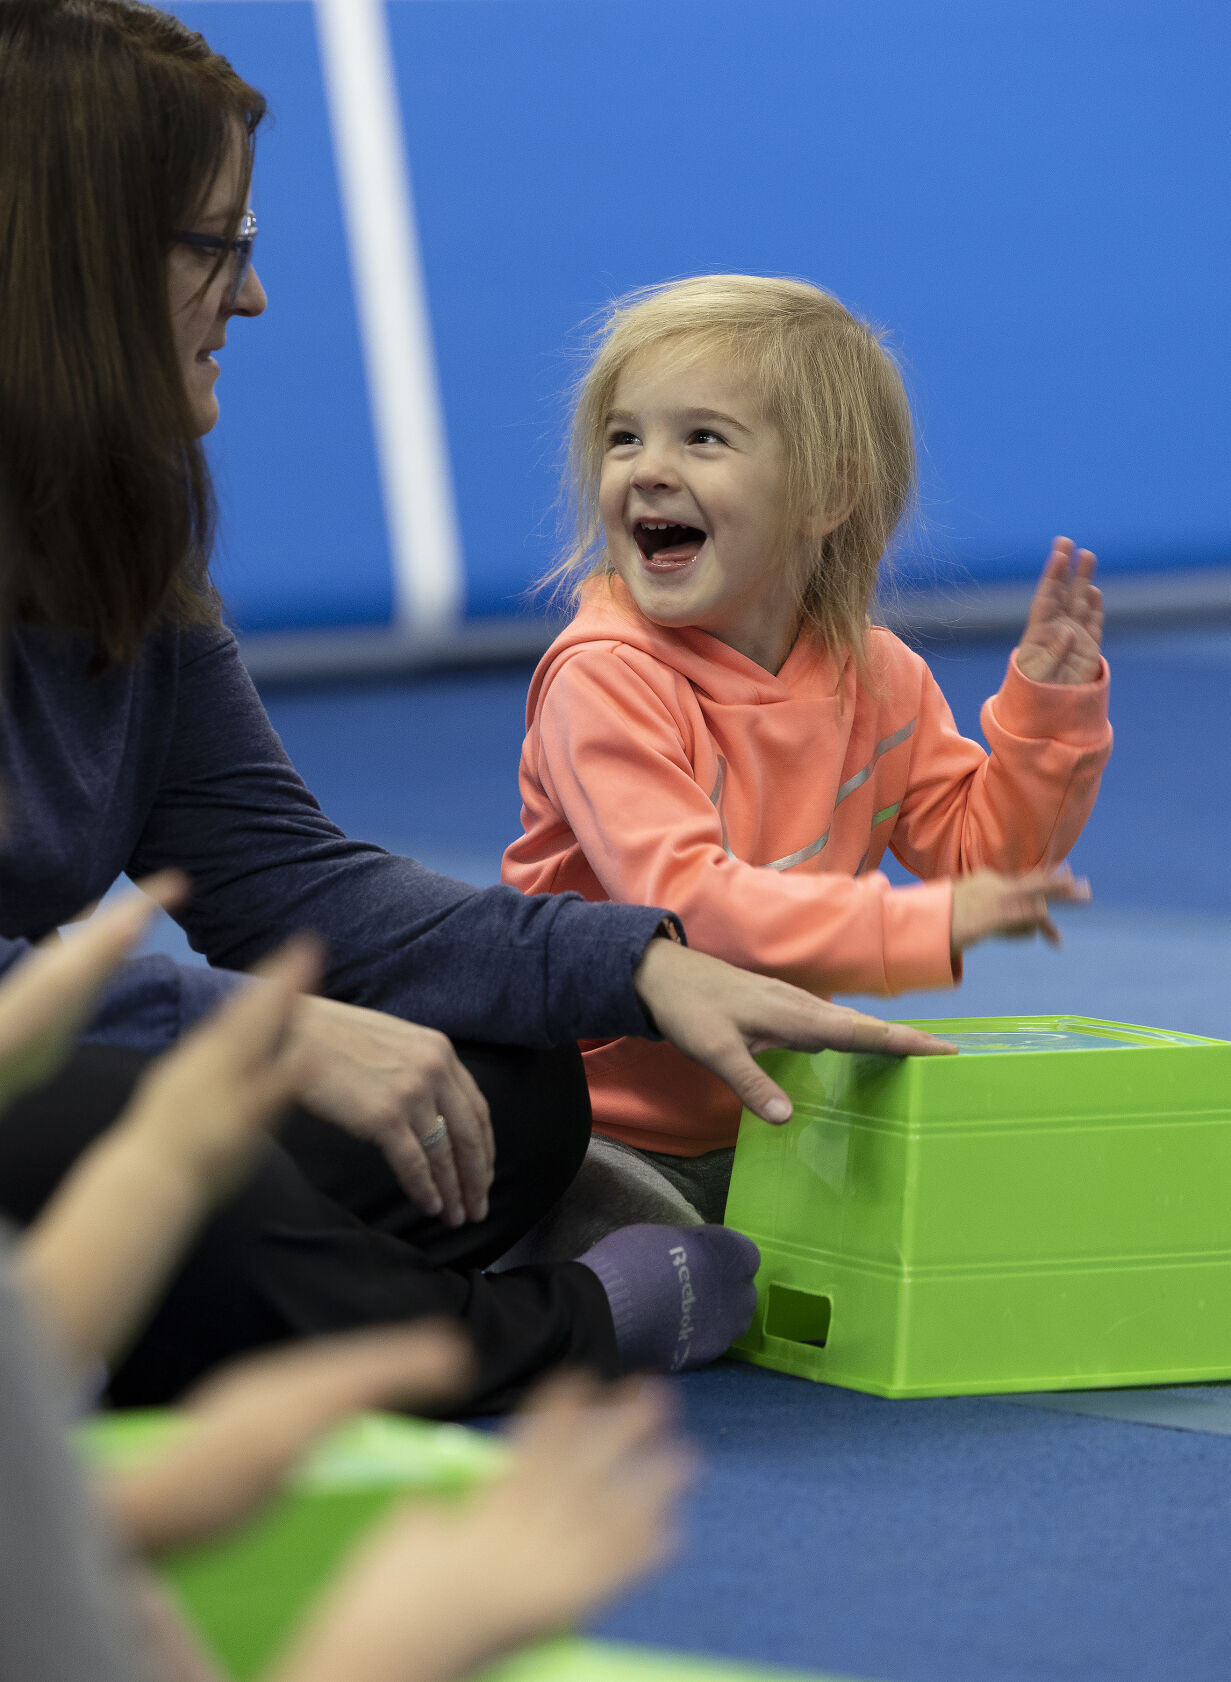 Marissa Tyson, 3, drums on a container as she looks at her mom, Nicole, during a Mommy and Me Music Class at Badger Elite Athletics in Shullsburg, Wis., on Wednesday, Nov. 16, 2022.    PHOTO CREDIT: Stephen Gassman